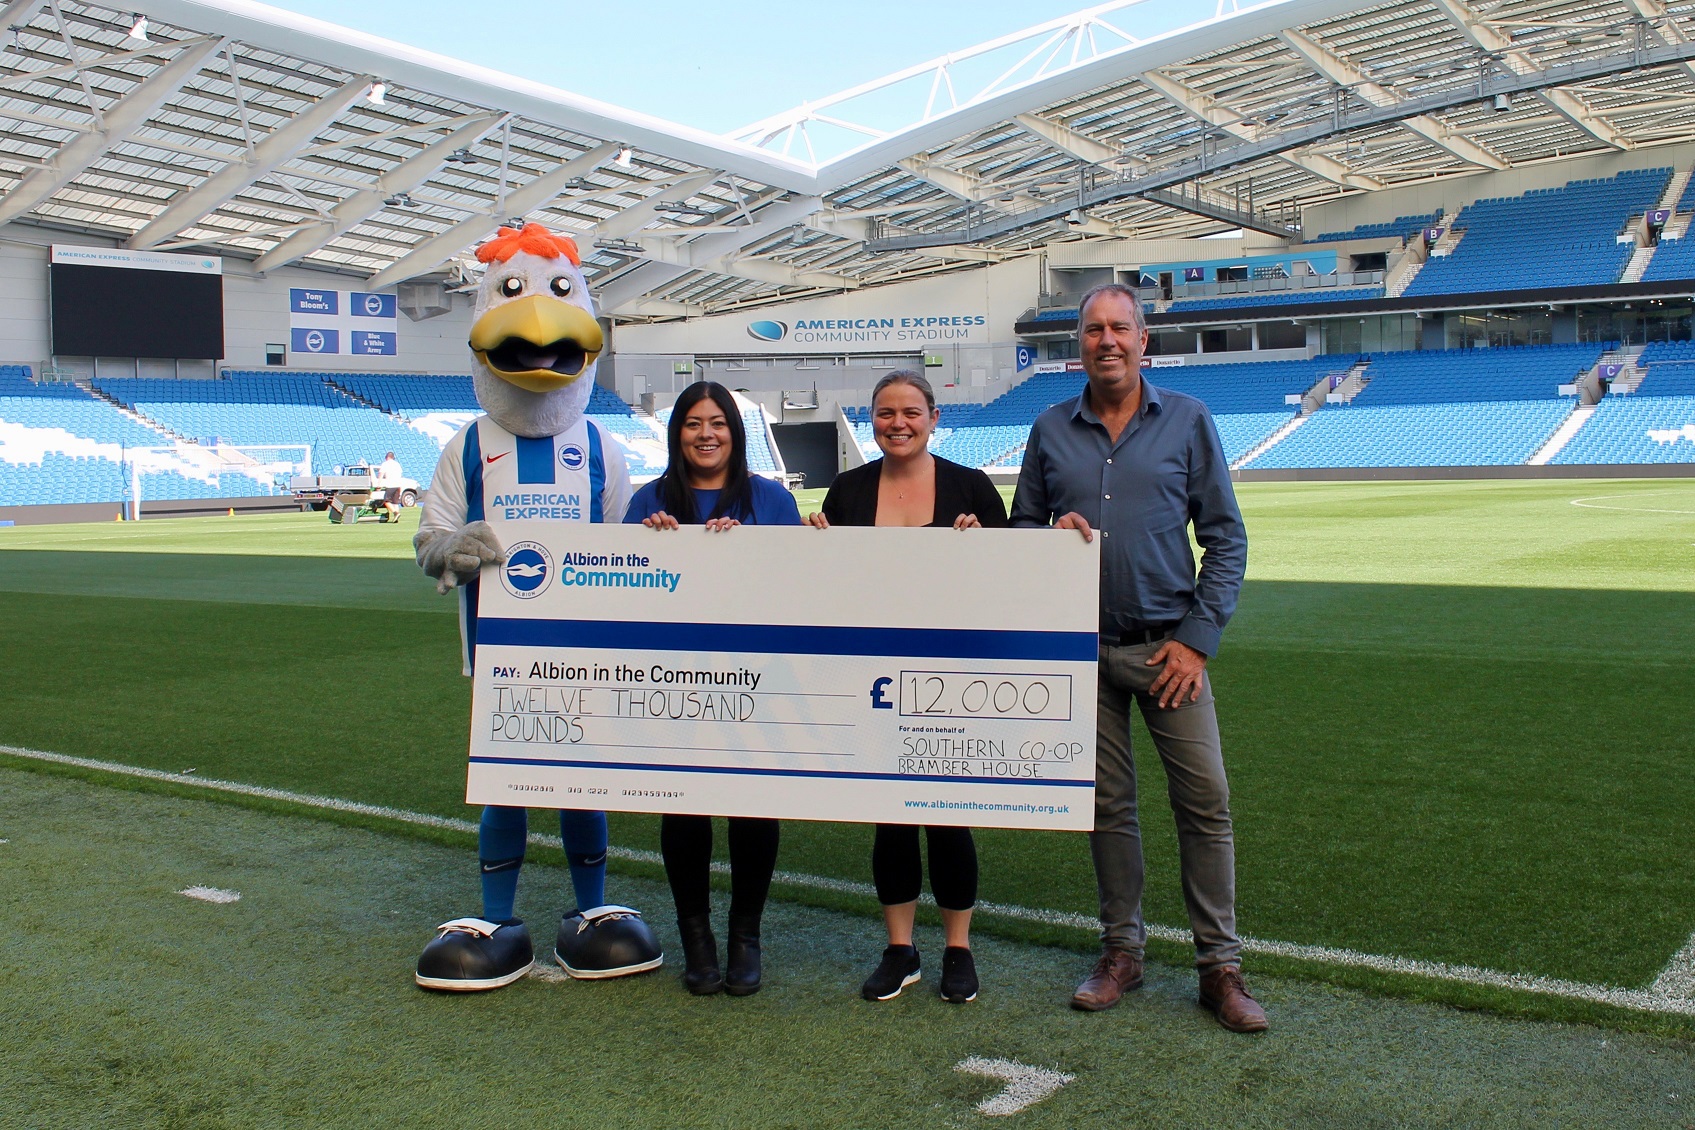 Co-op support nets £12,000 for Albion in the Community